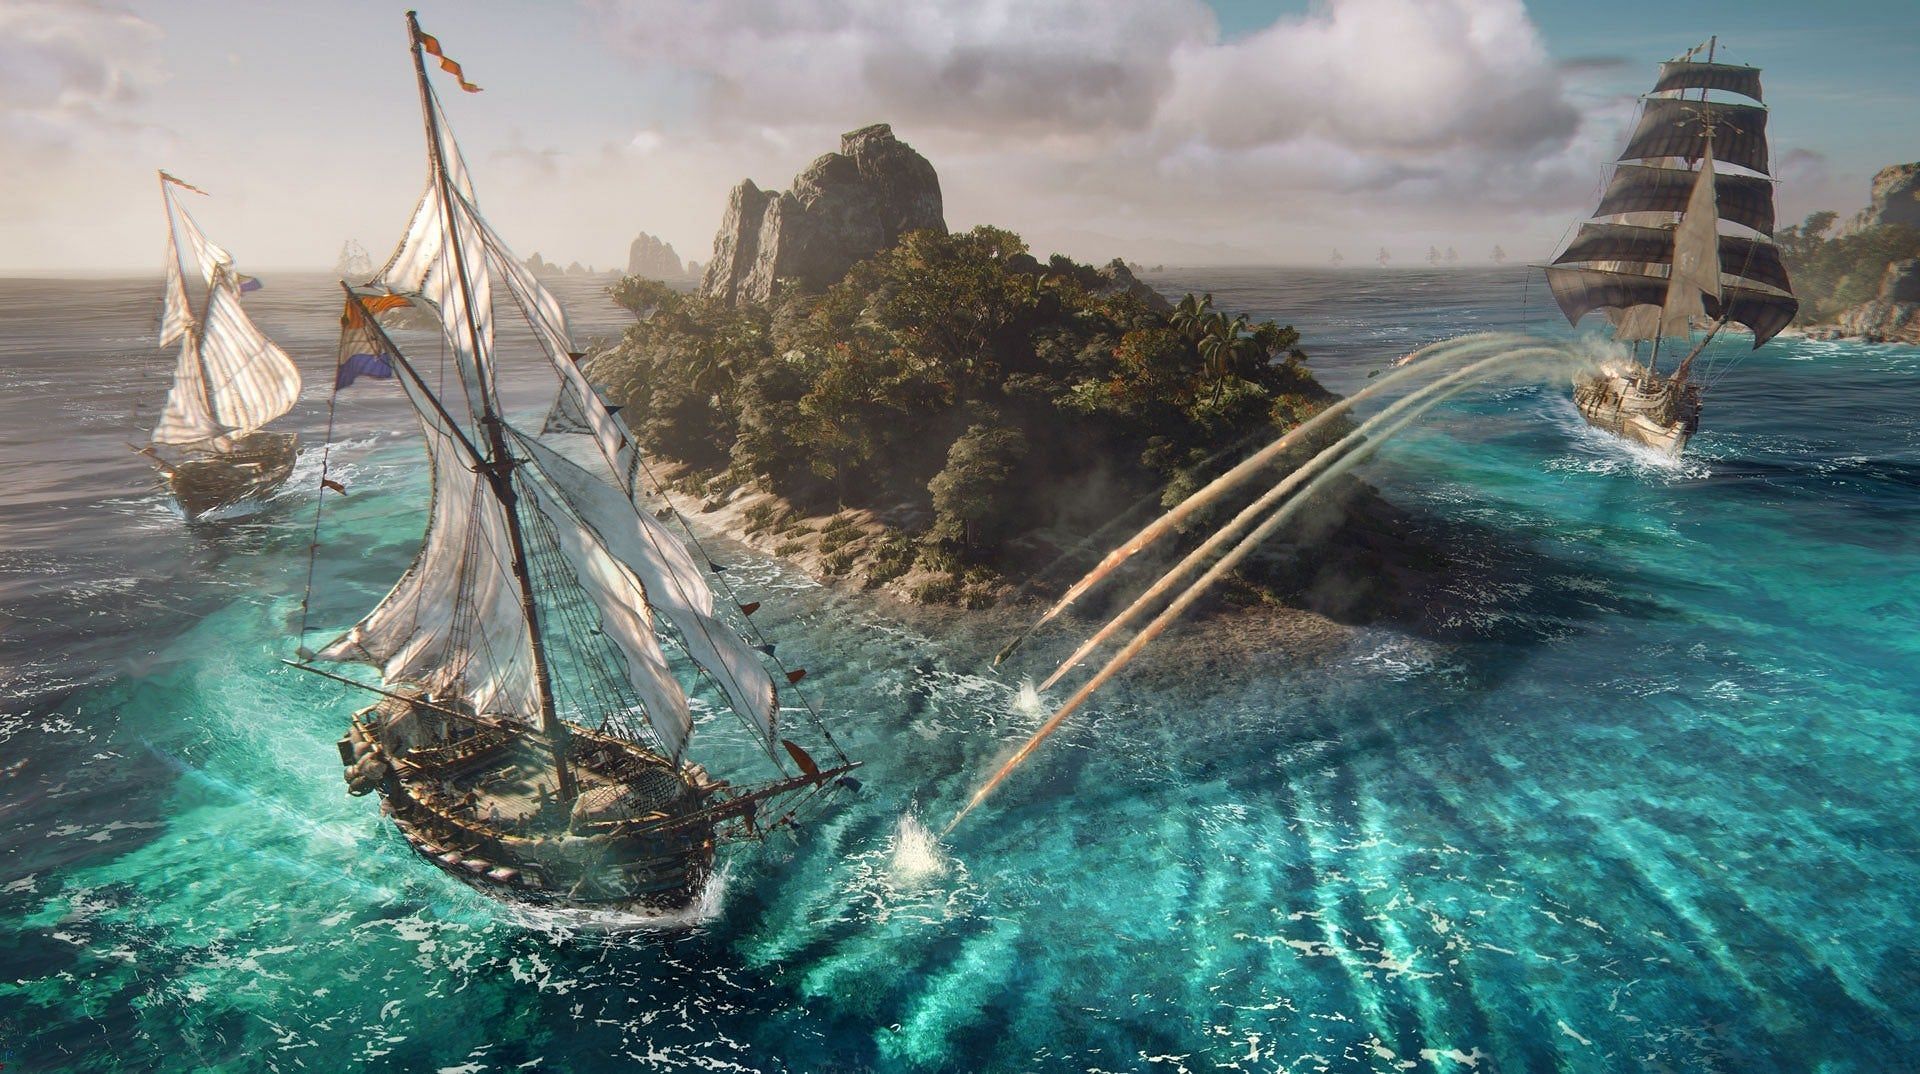 Users who want the full pirate experience can attack others in a Skull and Bones PvP server (Image via Ubisoft)